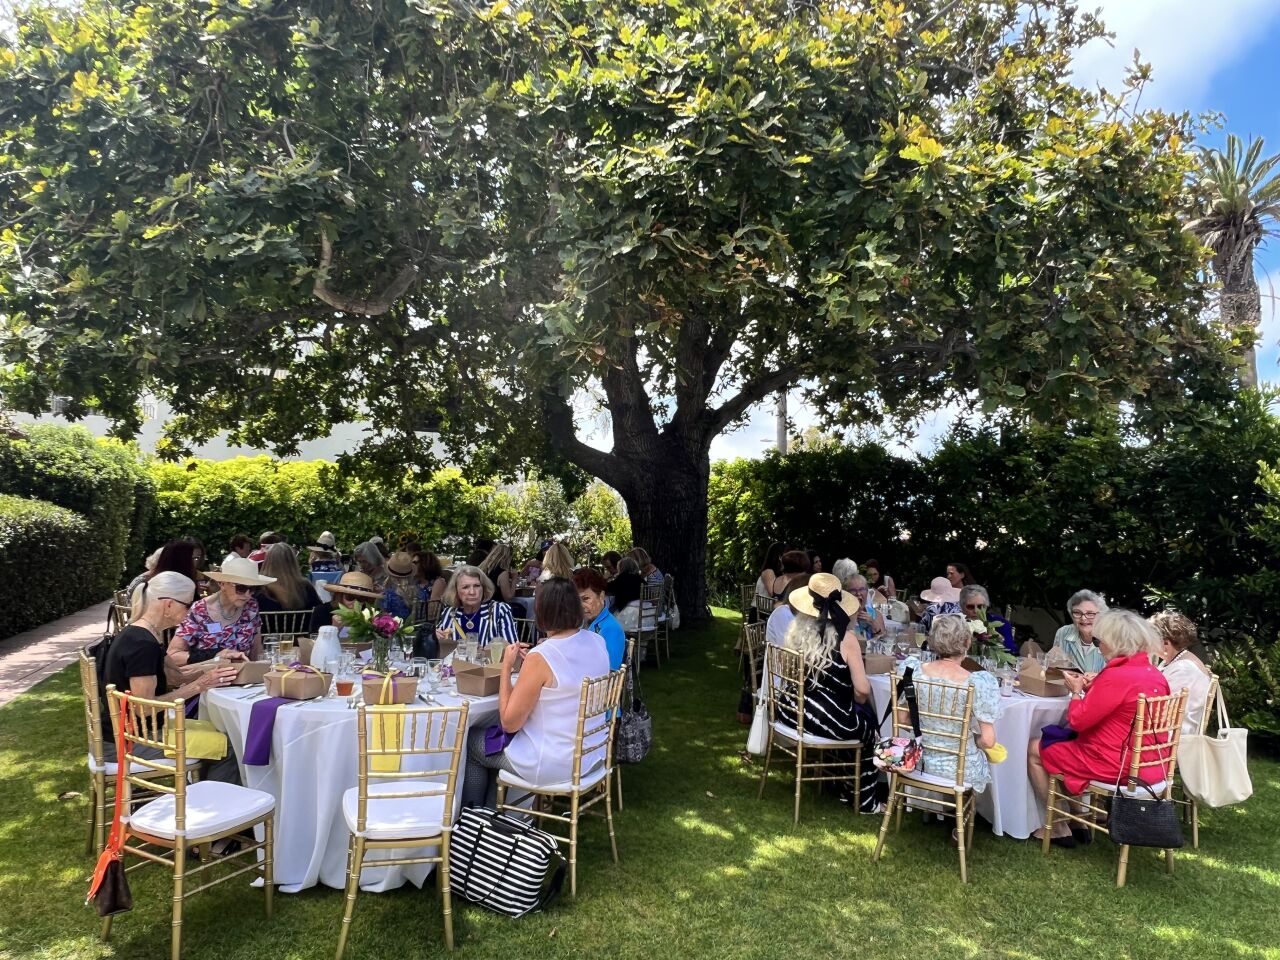 The La Jolla Woman's Club usually meets the first Monday of each month from October to June. Aug. 2 was a special outdoor luncheon.